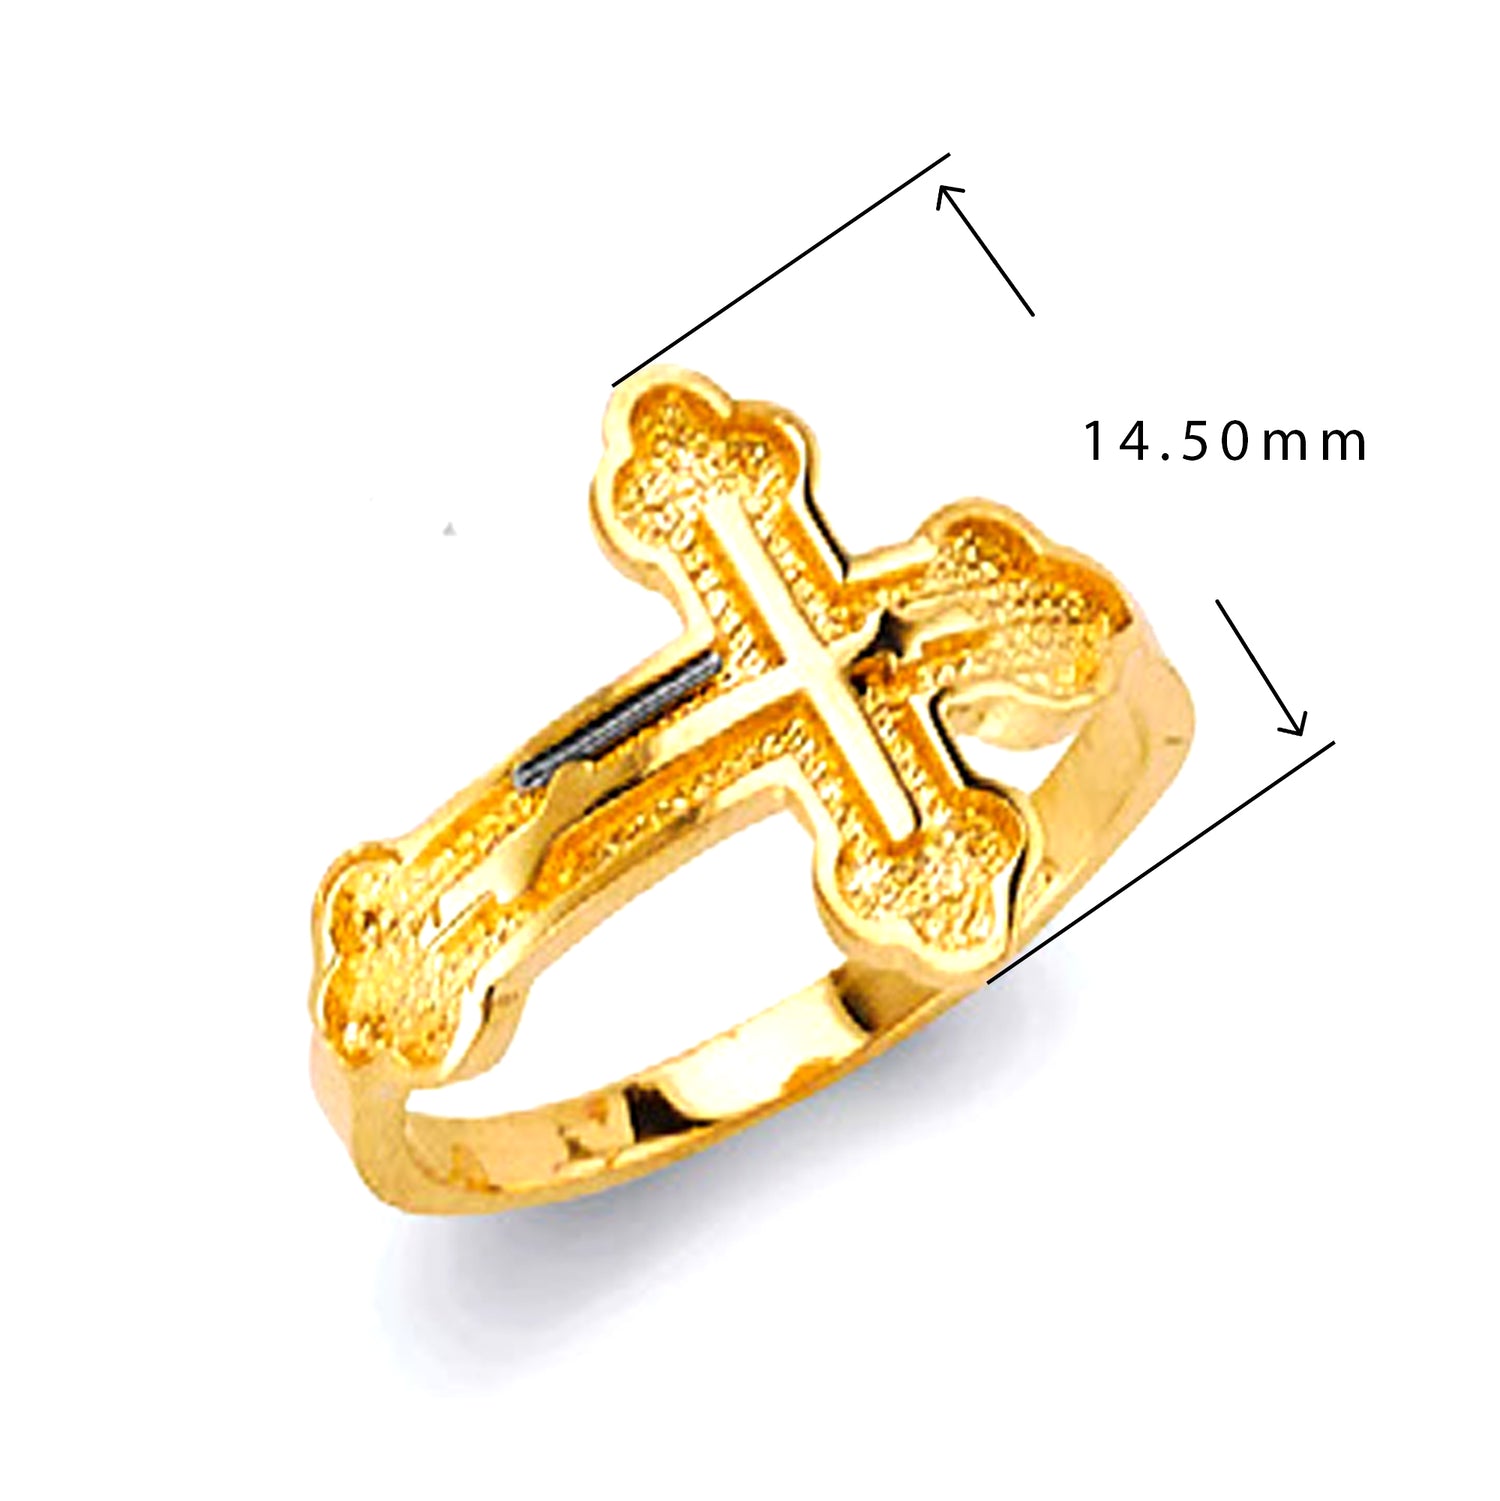 Vertical Cross Ring in Solid Gold with Measurement 